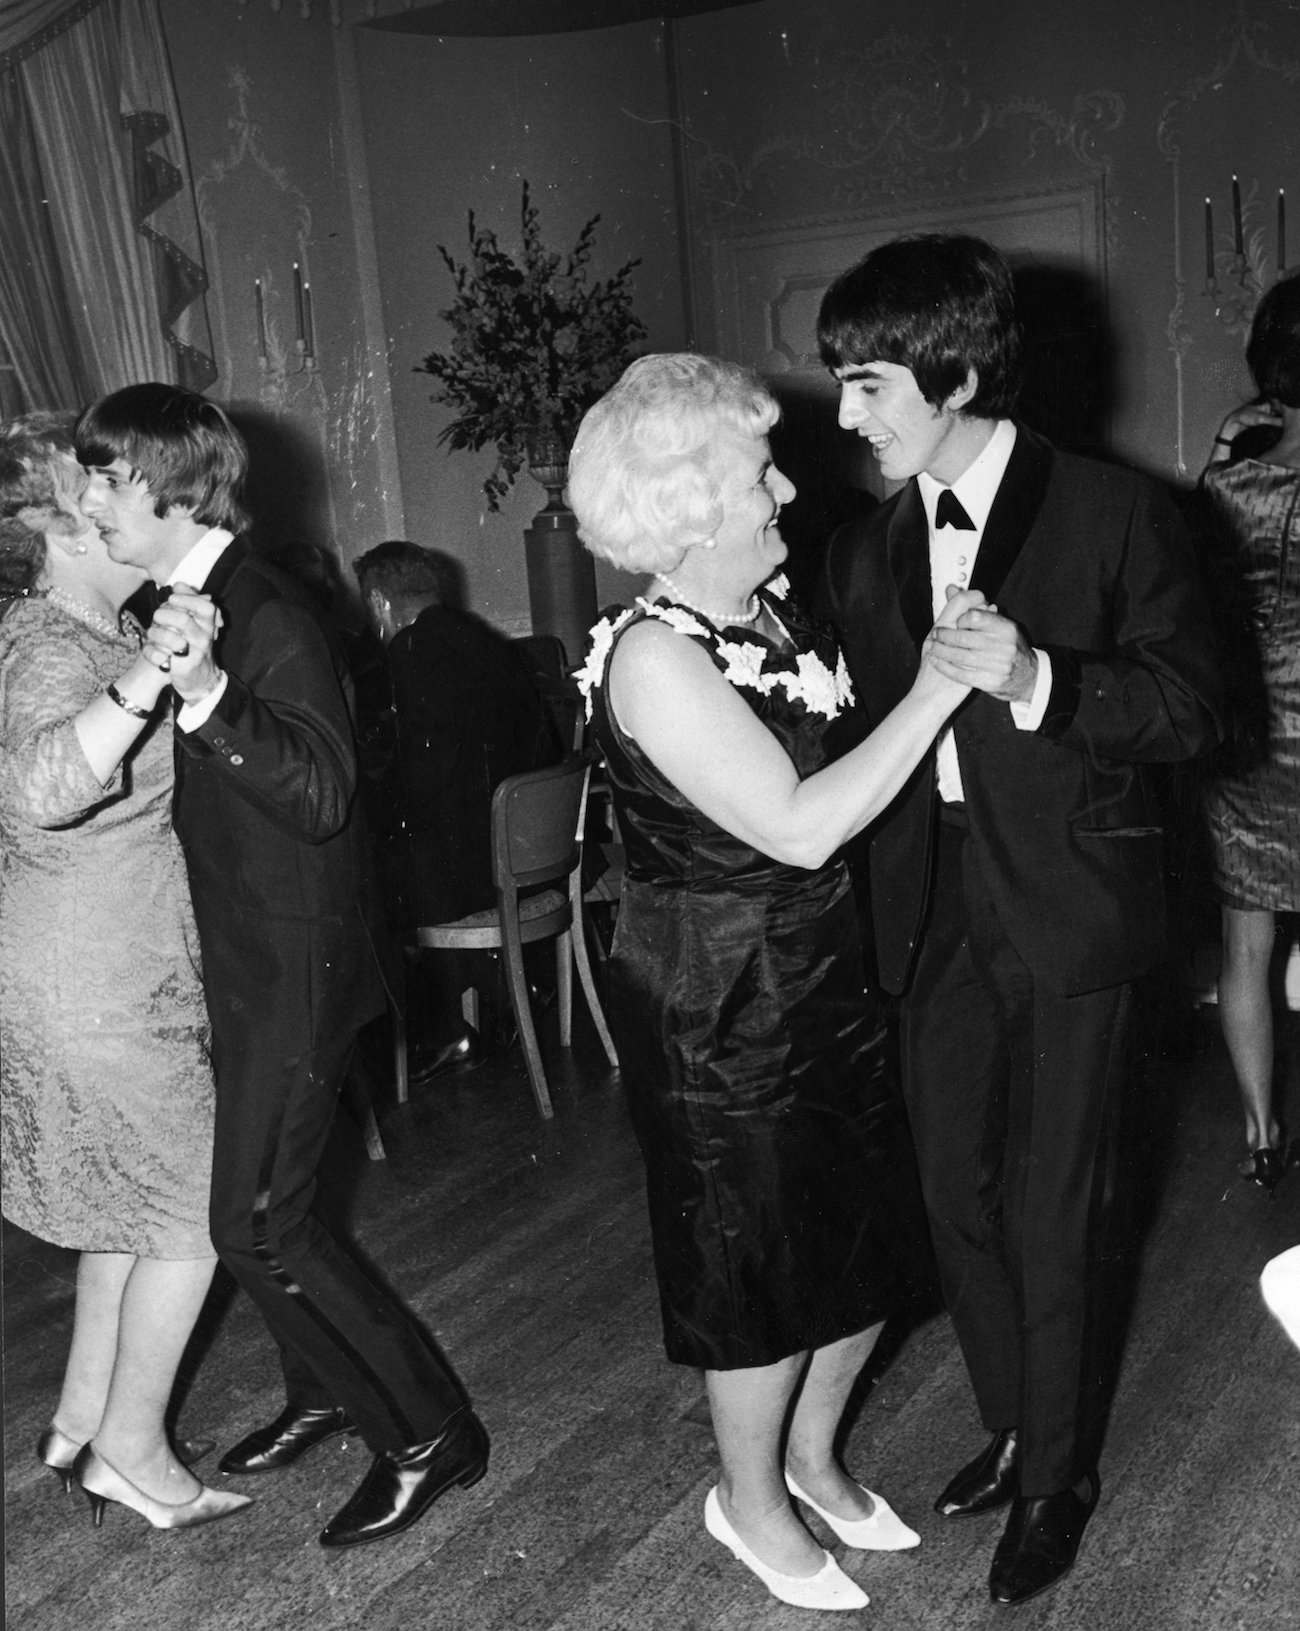 George Harrison and his mother at the premiere party for The Beatles' 'A Hard Day's Night' in 1964.